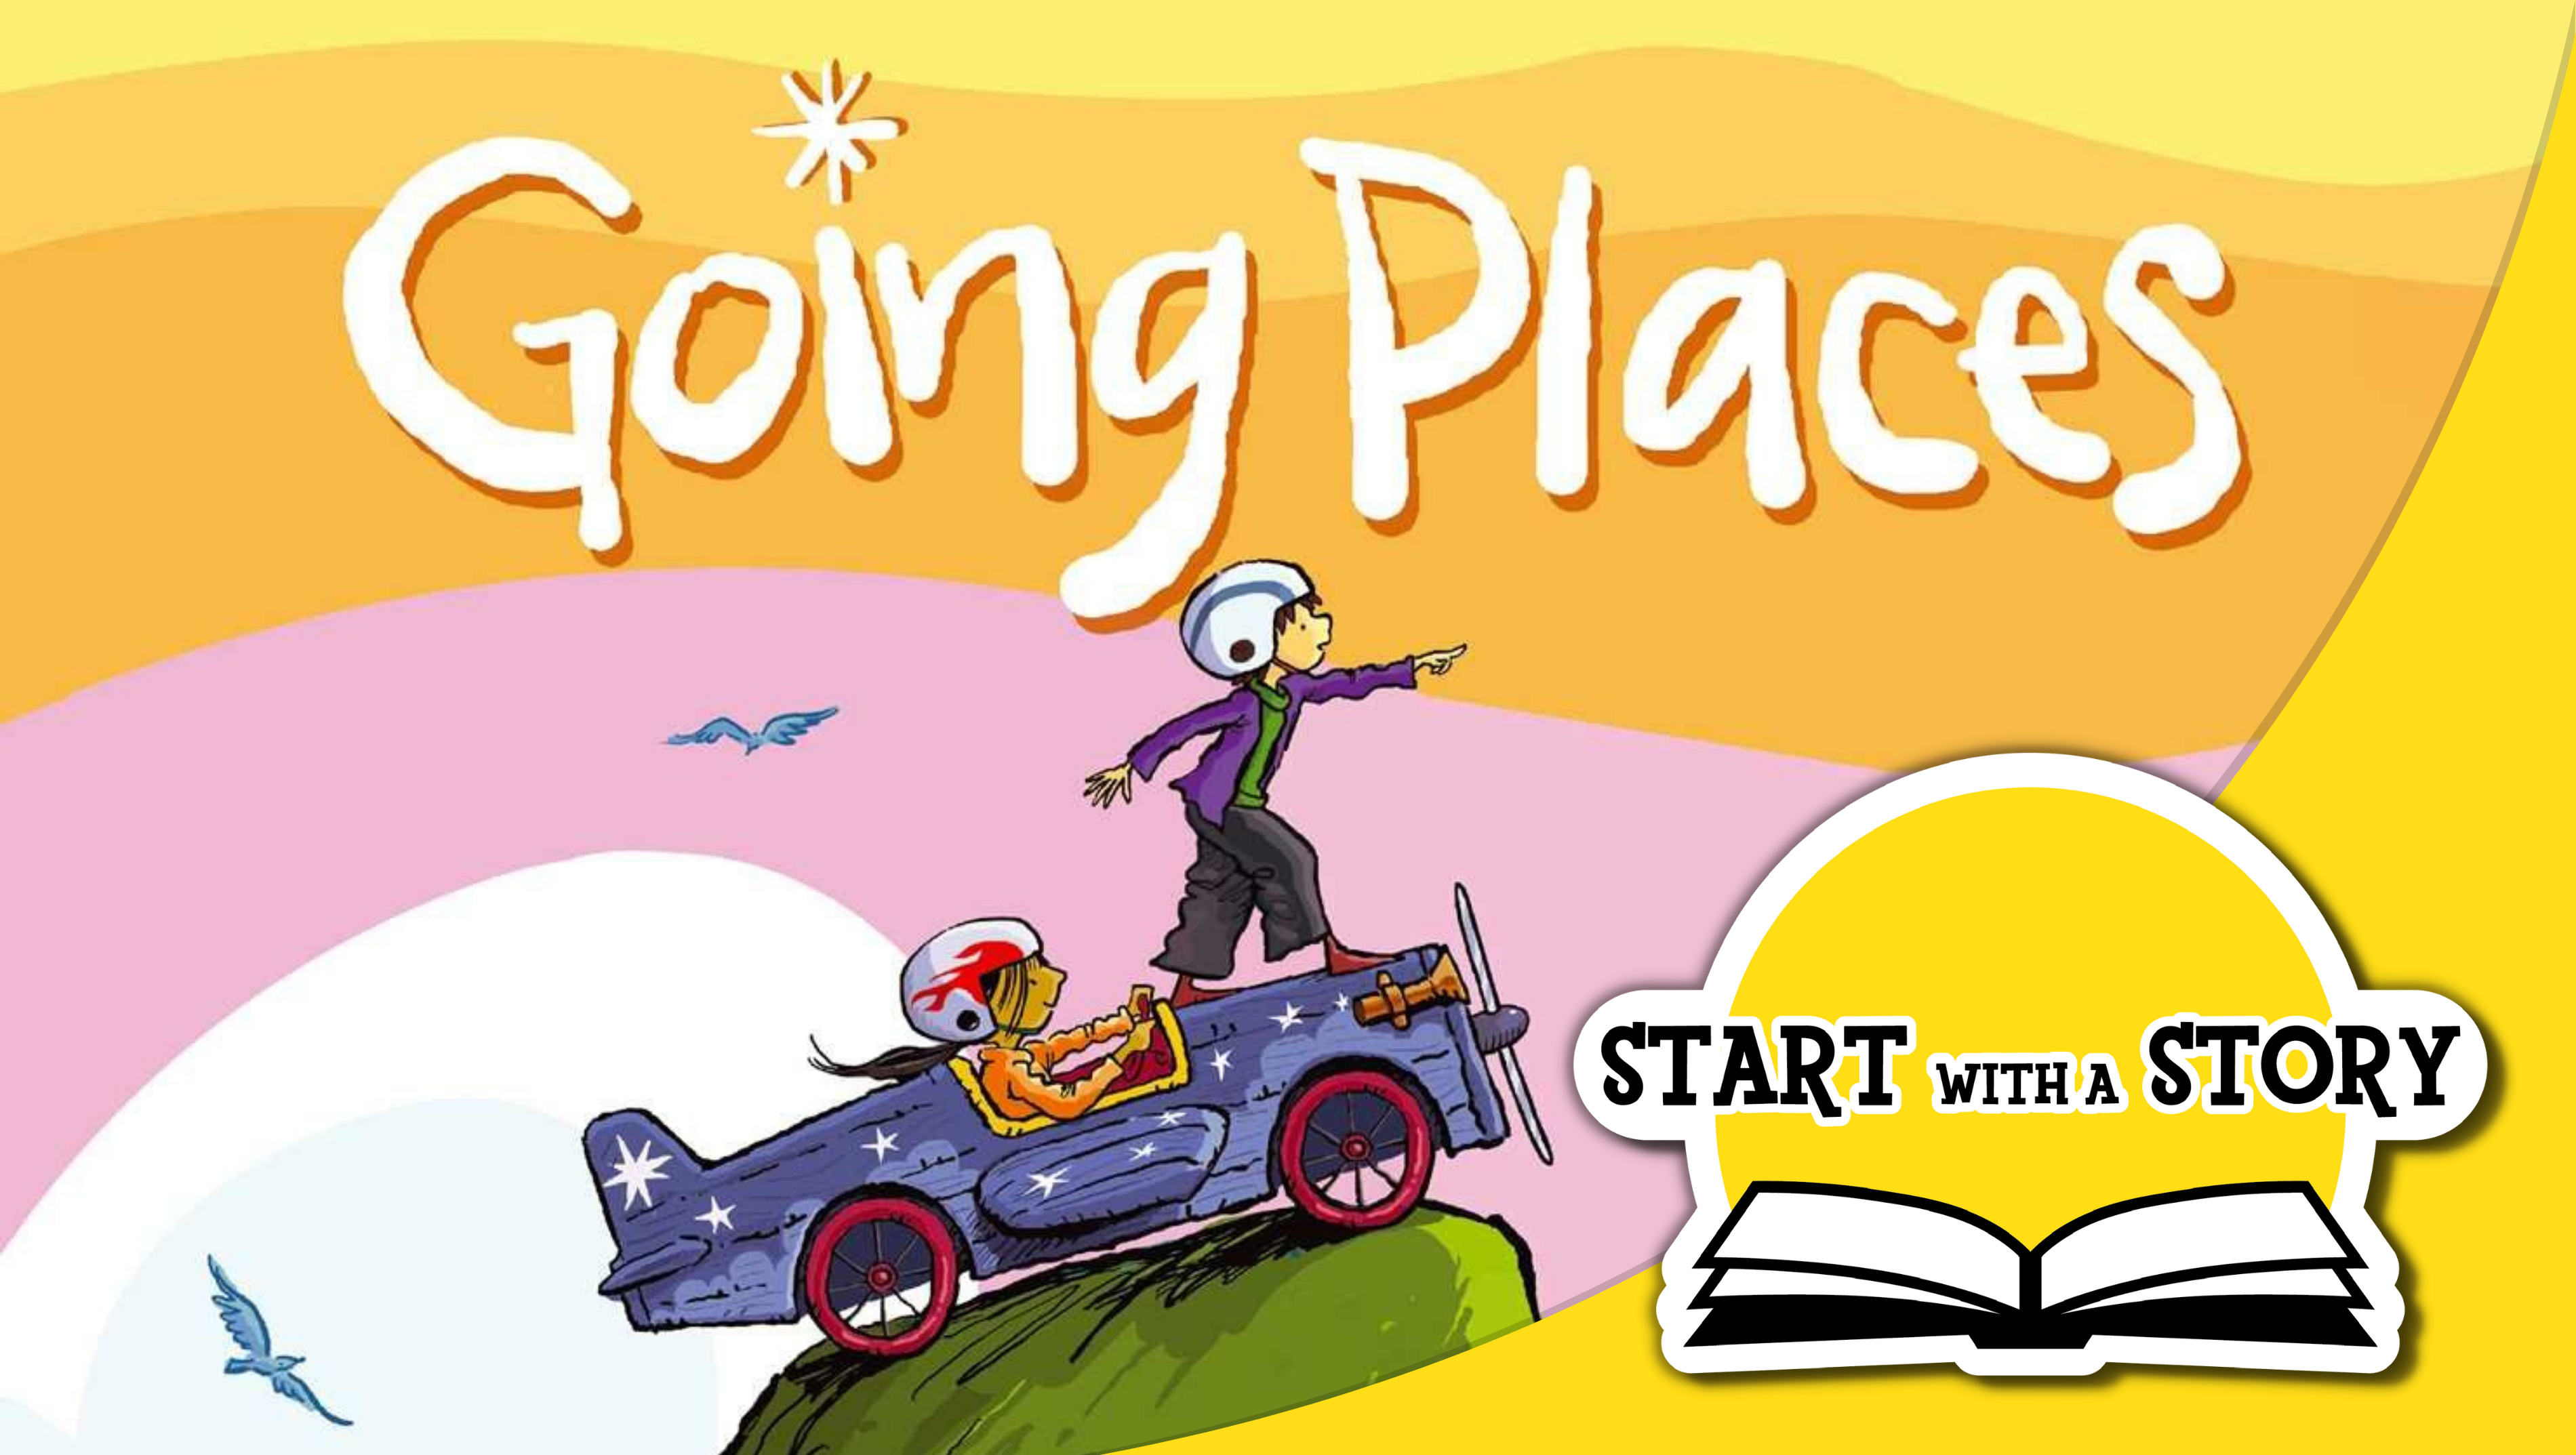 Start With a Story Going Places Overview